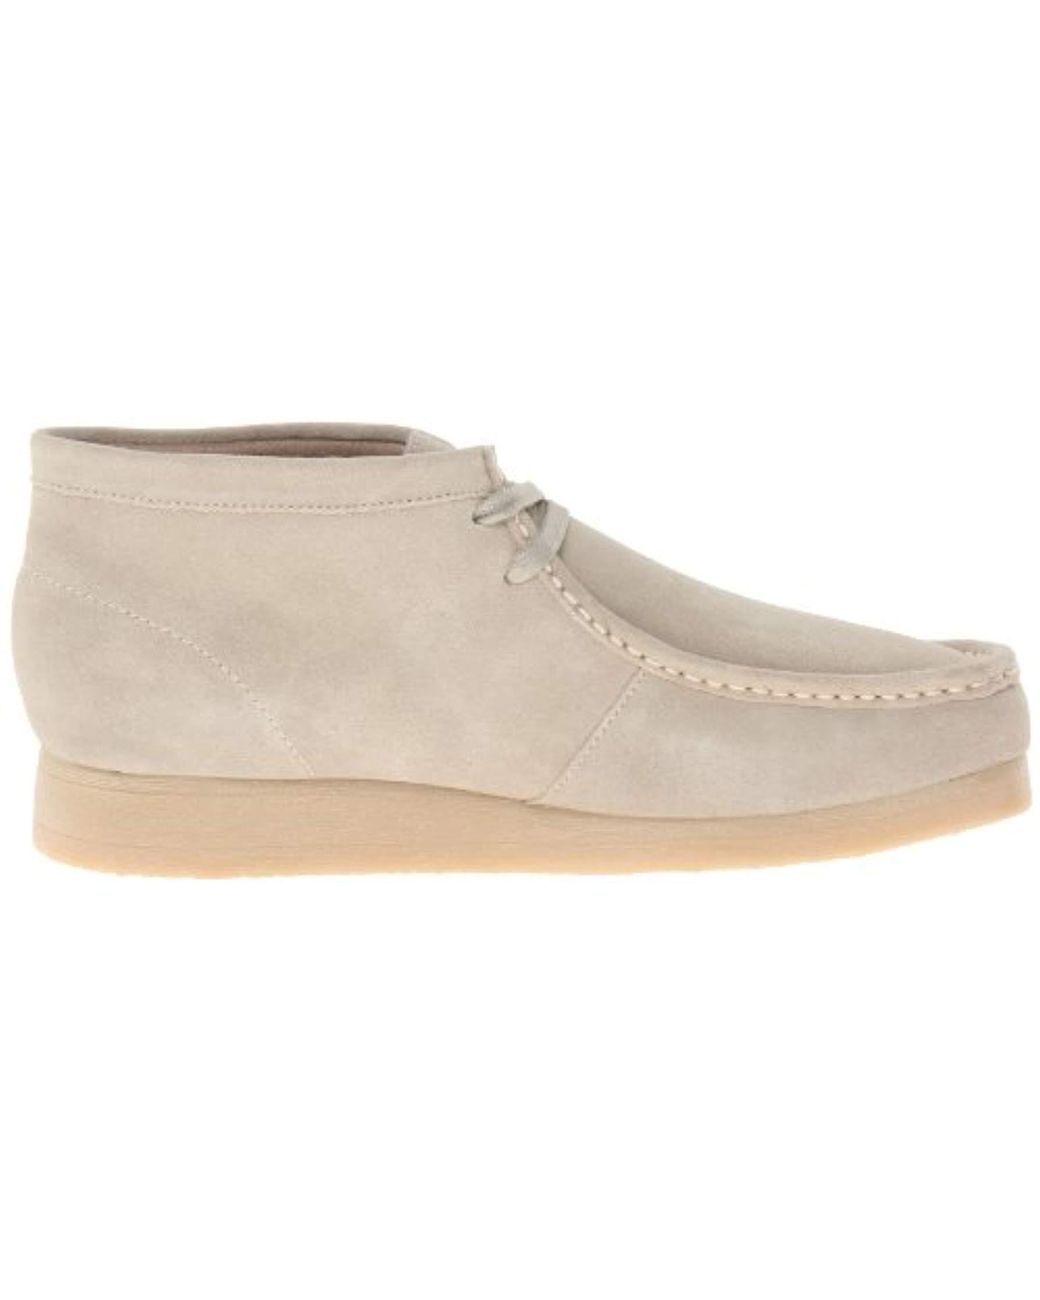 Clarks Stinson Hi Chukka Boot,sand Suede,8 M Us in Natural for